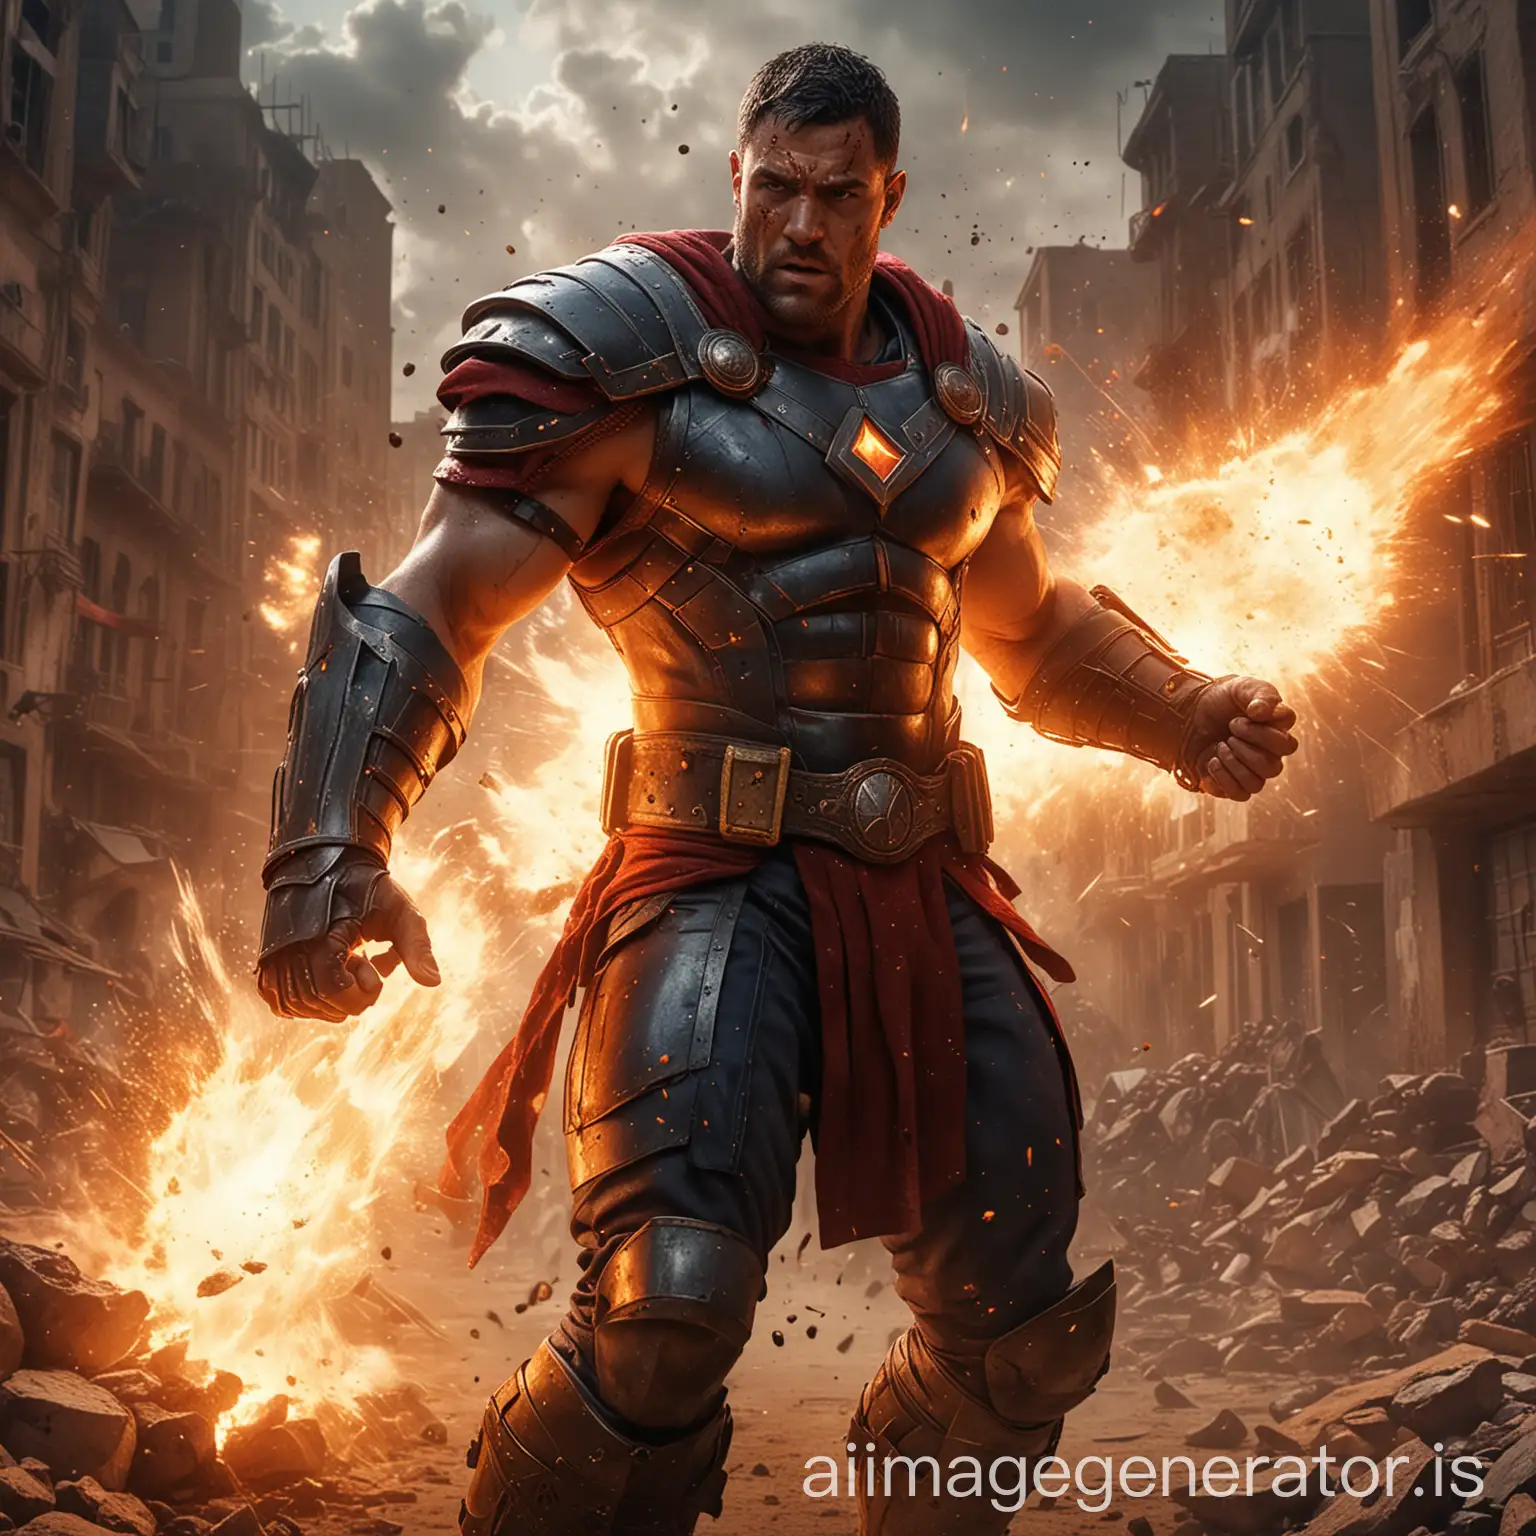 Draw realistic and cinematic art of MARVEL character GLADIATOR with explosion behind him